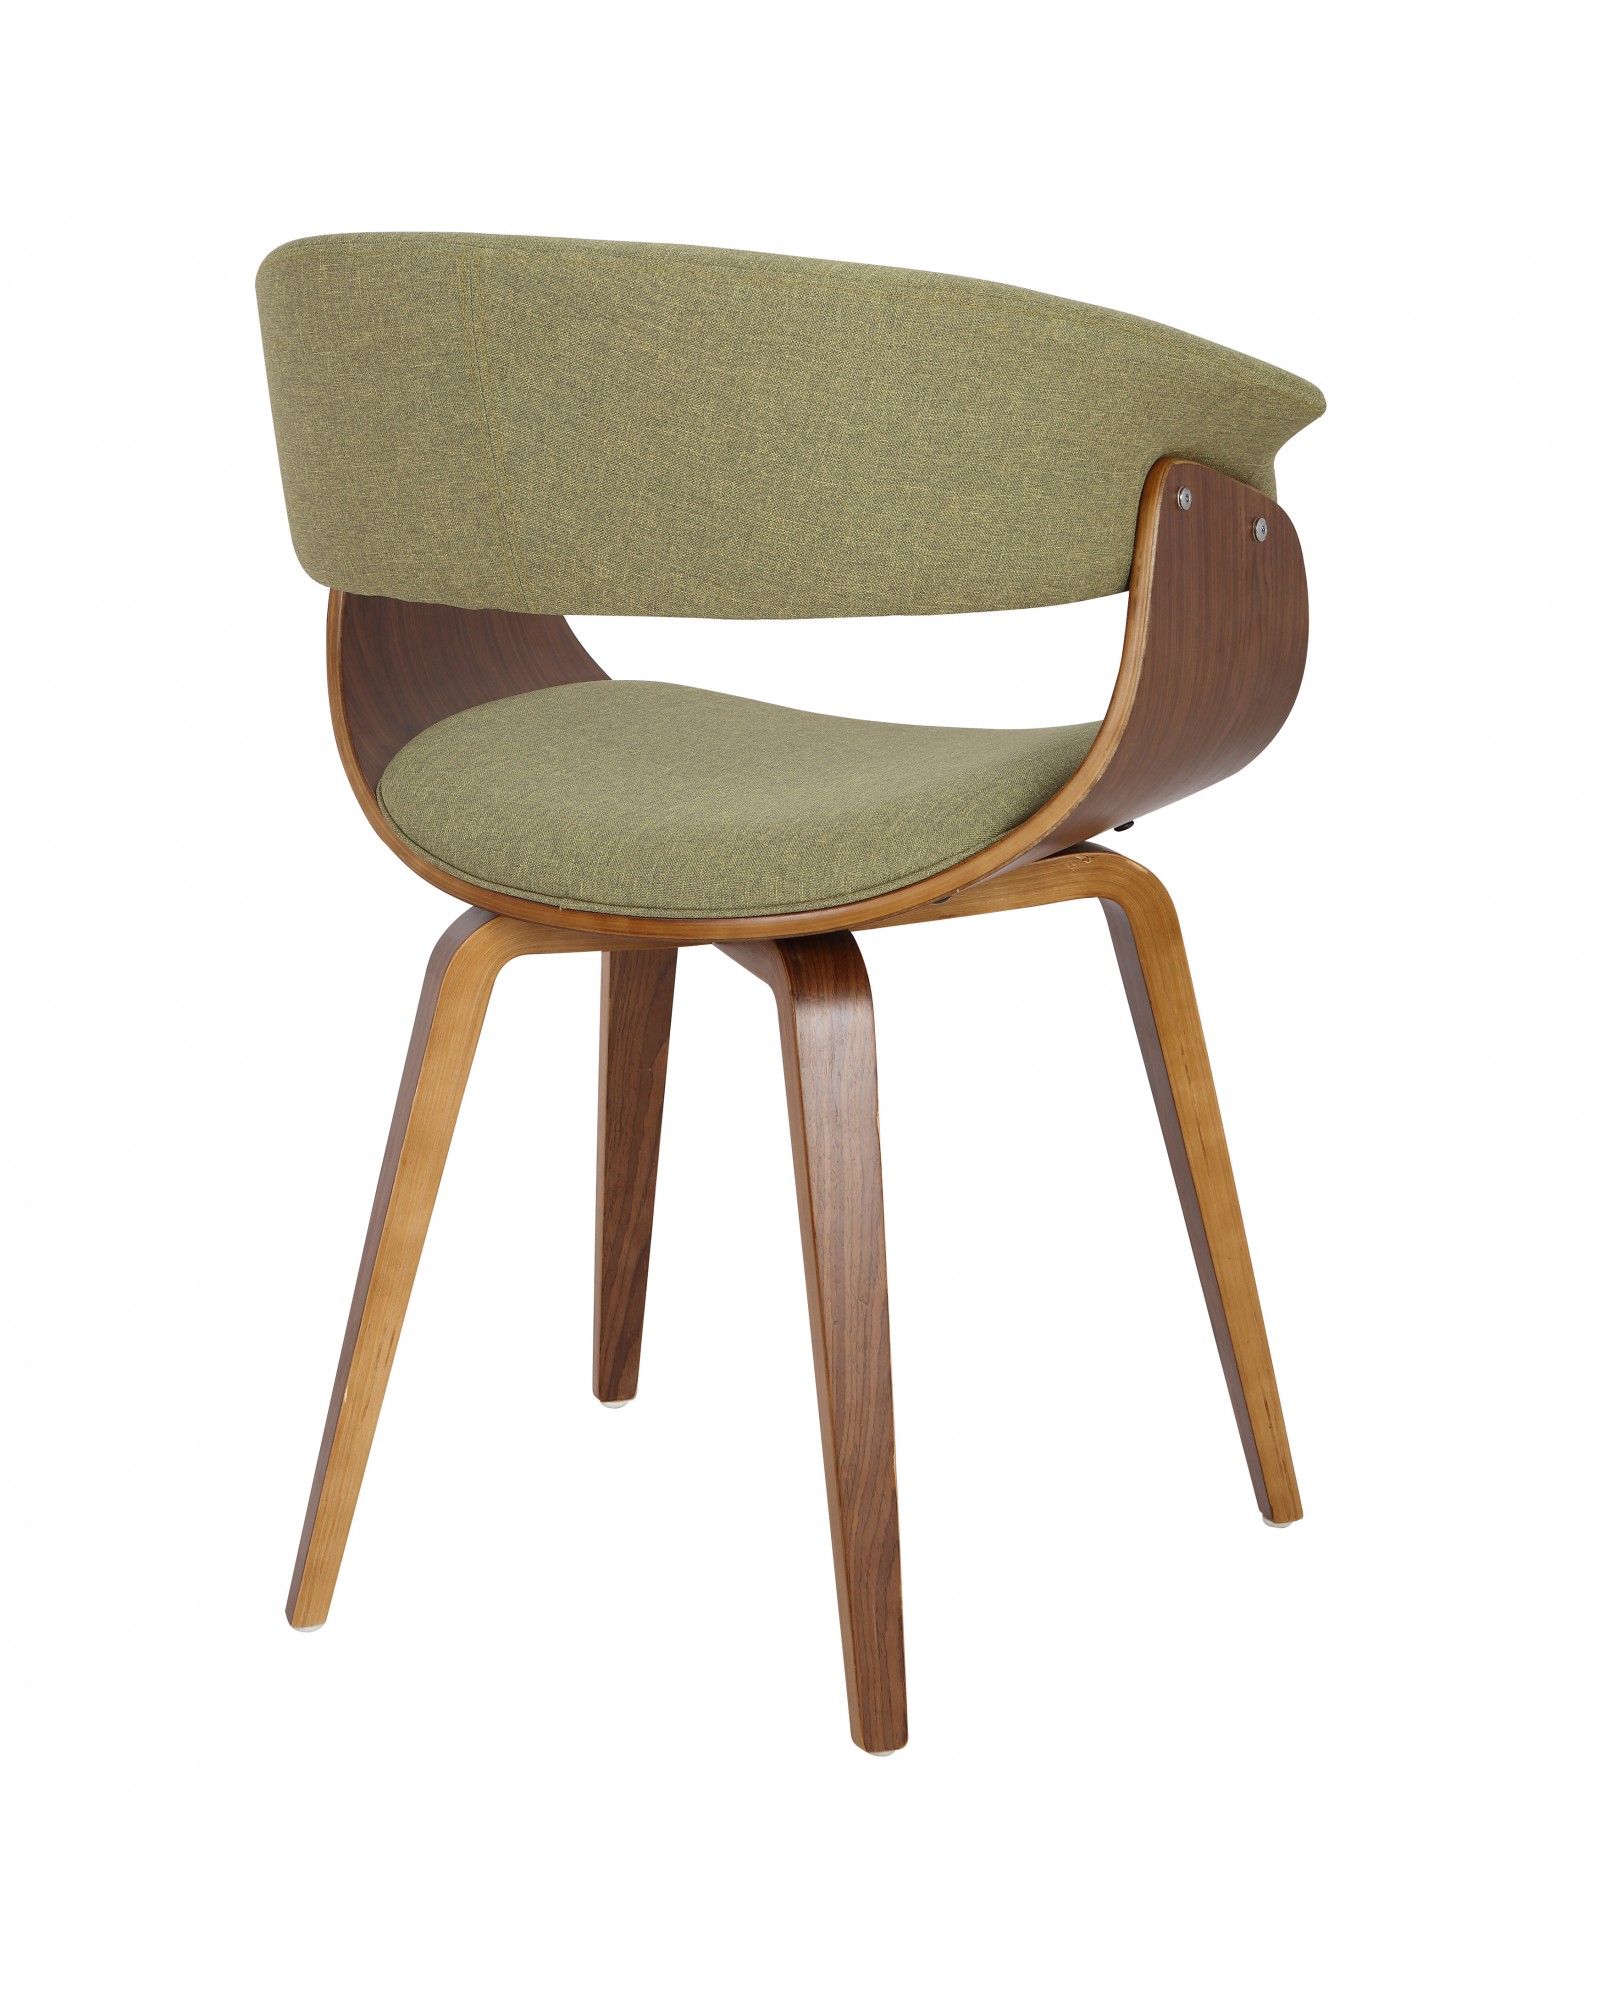 Vintage Mod Mid-Century Modern Dining/Accent Chair in Walnut and Green